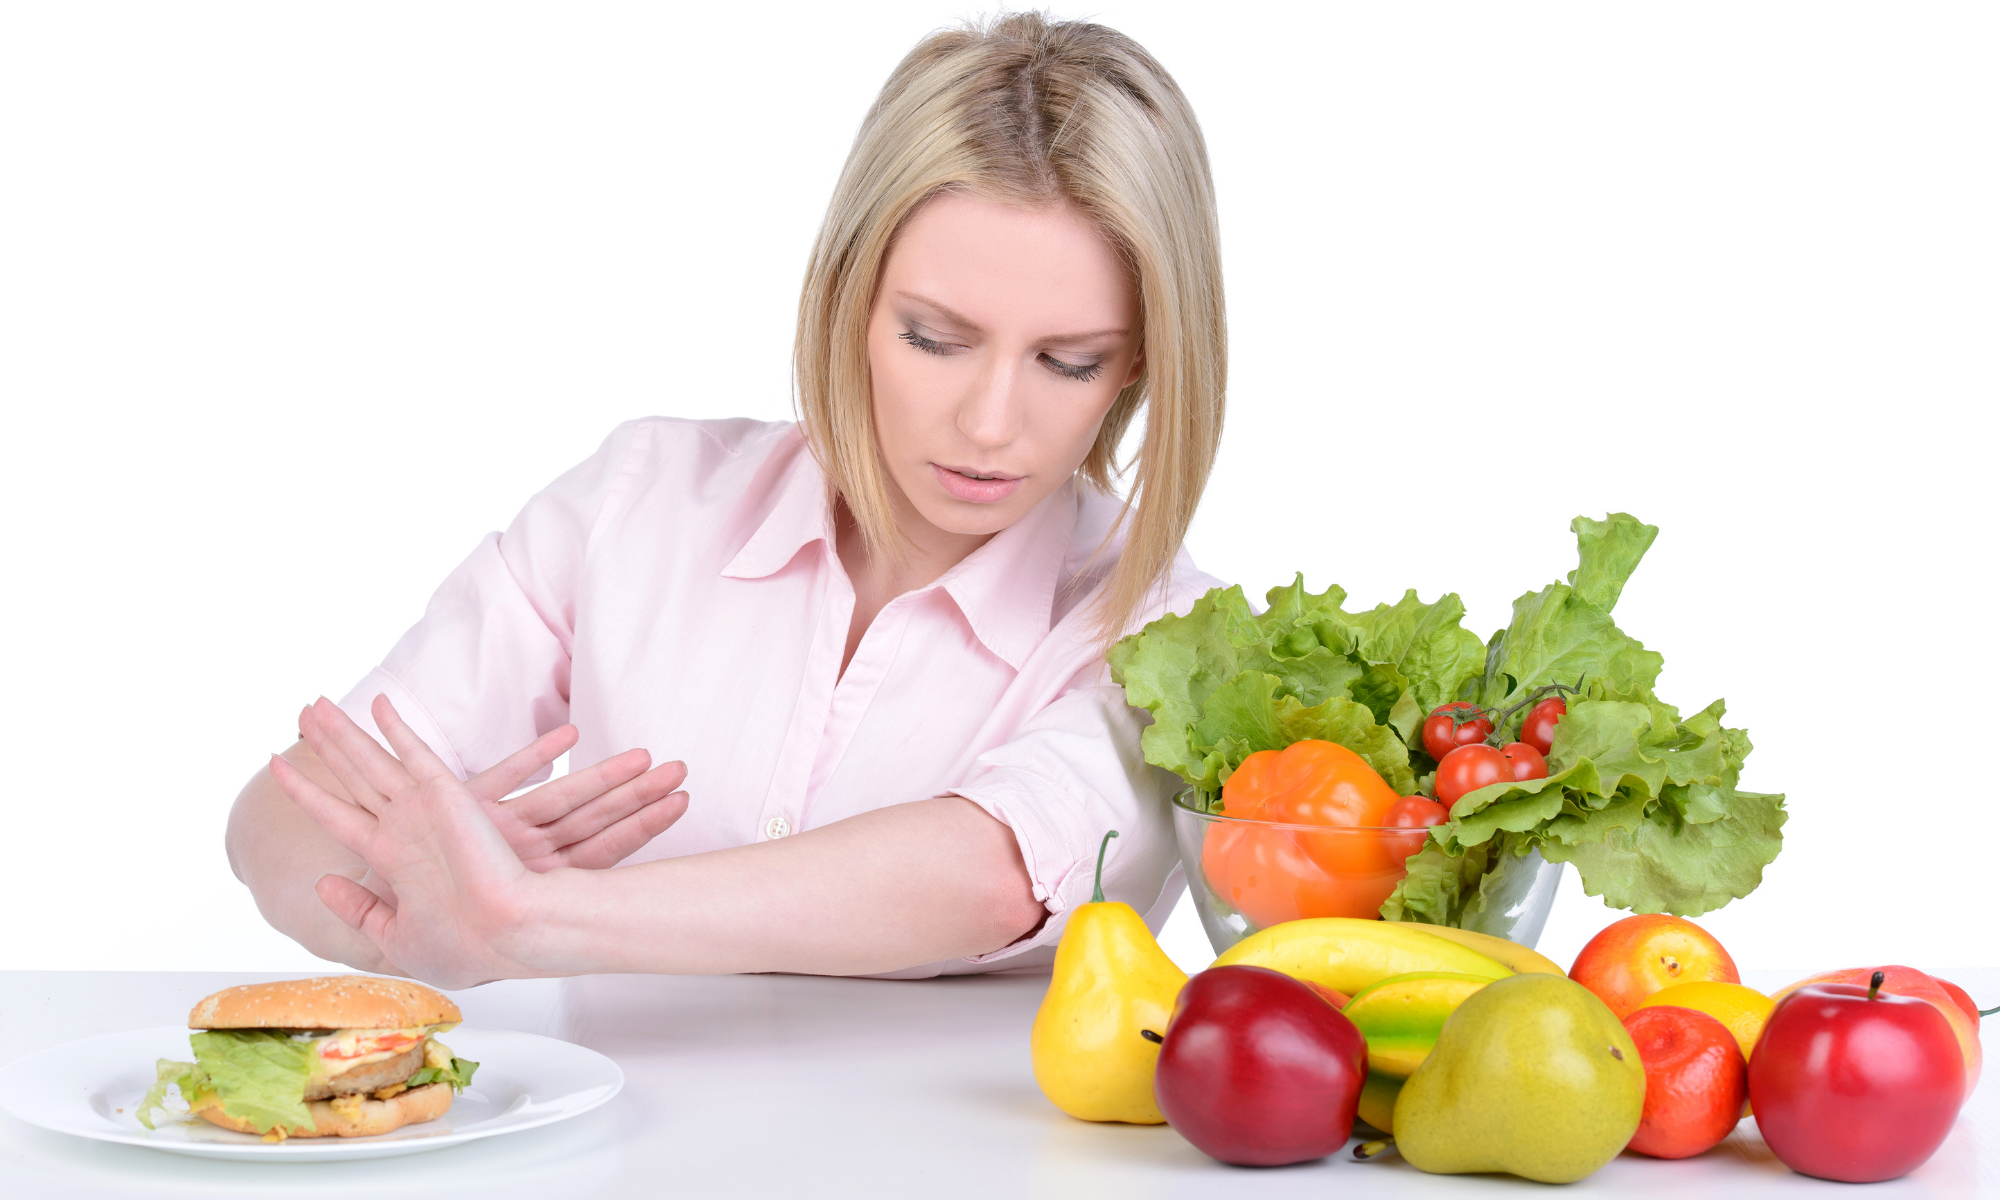 Woman holds out hands in refusal of hamburger on the left while various fruits and vegetables are on the right